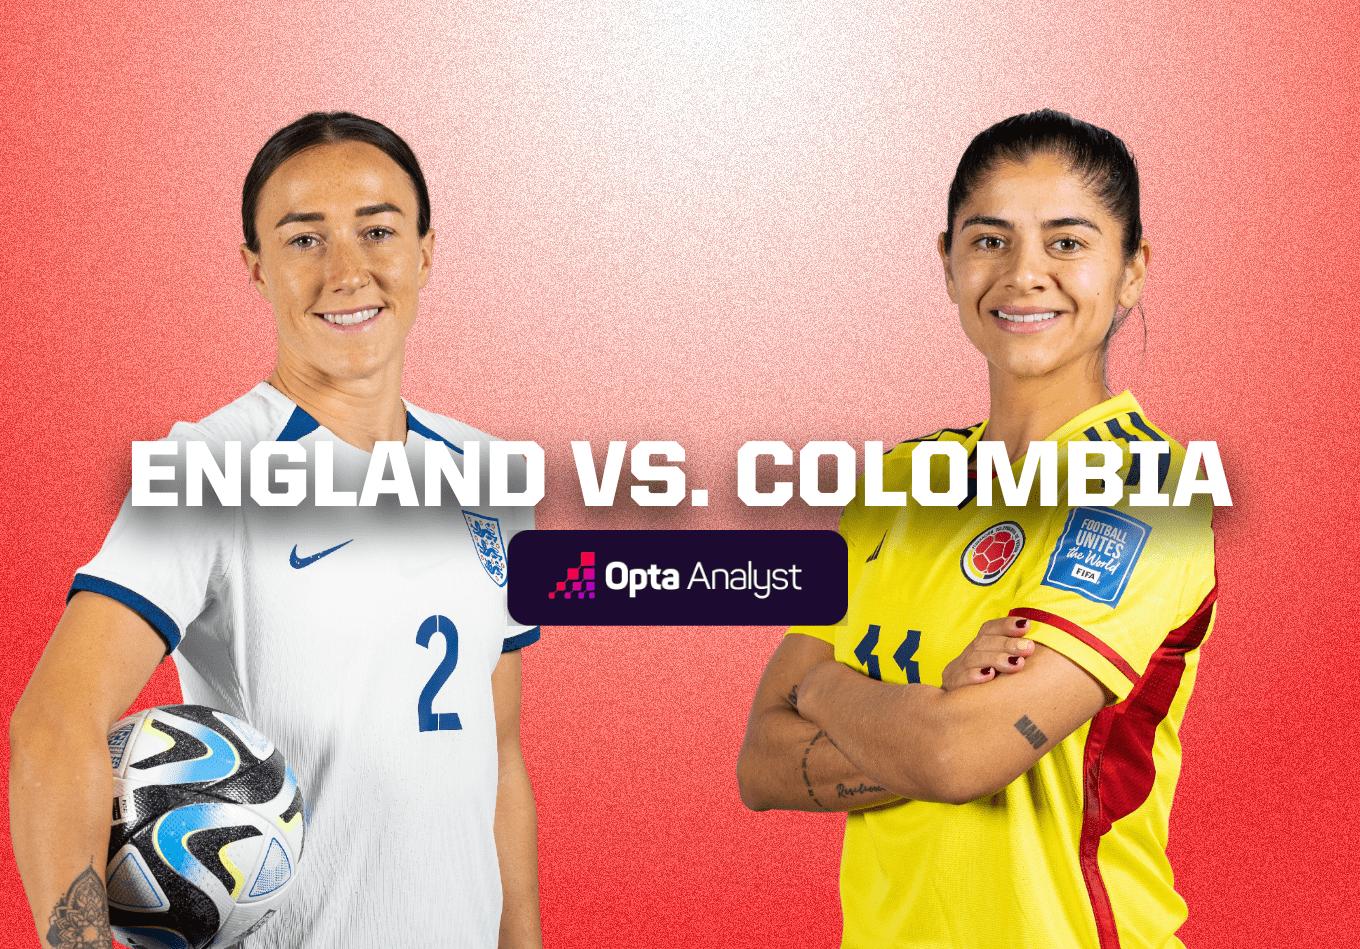 England vs Colombia: 2023 Women’s World Cup Match Preview and Prediction